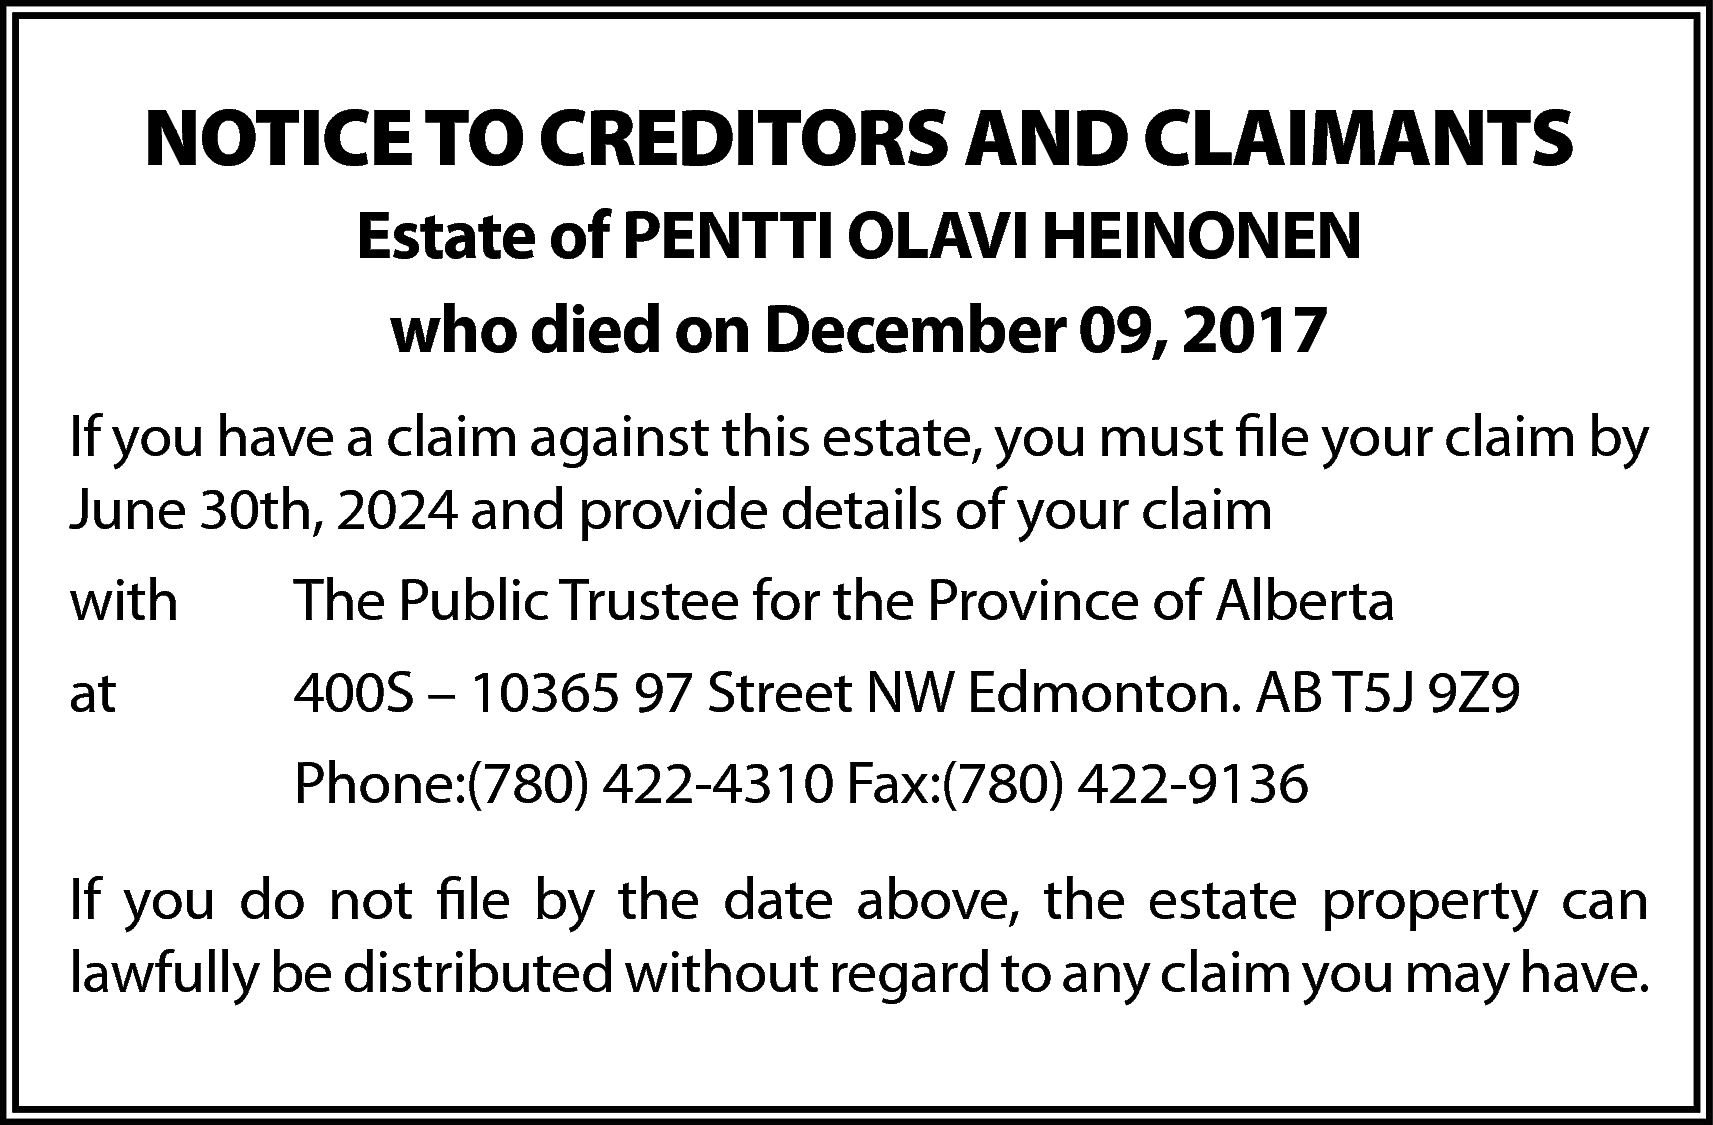 NOTICE TO CREDITORS AND CLAIMANTS  NOTICE TO CREDITORS AND CLAIMANTS  Estate of PENTTI OLAVI HEINONEN  who died on December 09, 2017  If you have a claim against this estate, you must file your claim by  June 30th, 2024 and provide details of your claim  with    The Public Trustee for the Province of Alberta    at    400S – 10365 97 Street NW Edmonton. AB T5J 9Z9  Phone:(780) 422-4310 Fax:(780) 422-9136    If you do not file by the date above, the estate property can  lawfully be distributed without regard to any claim you may have.    